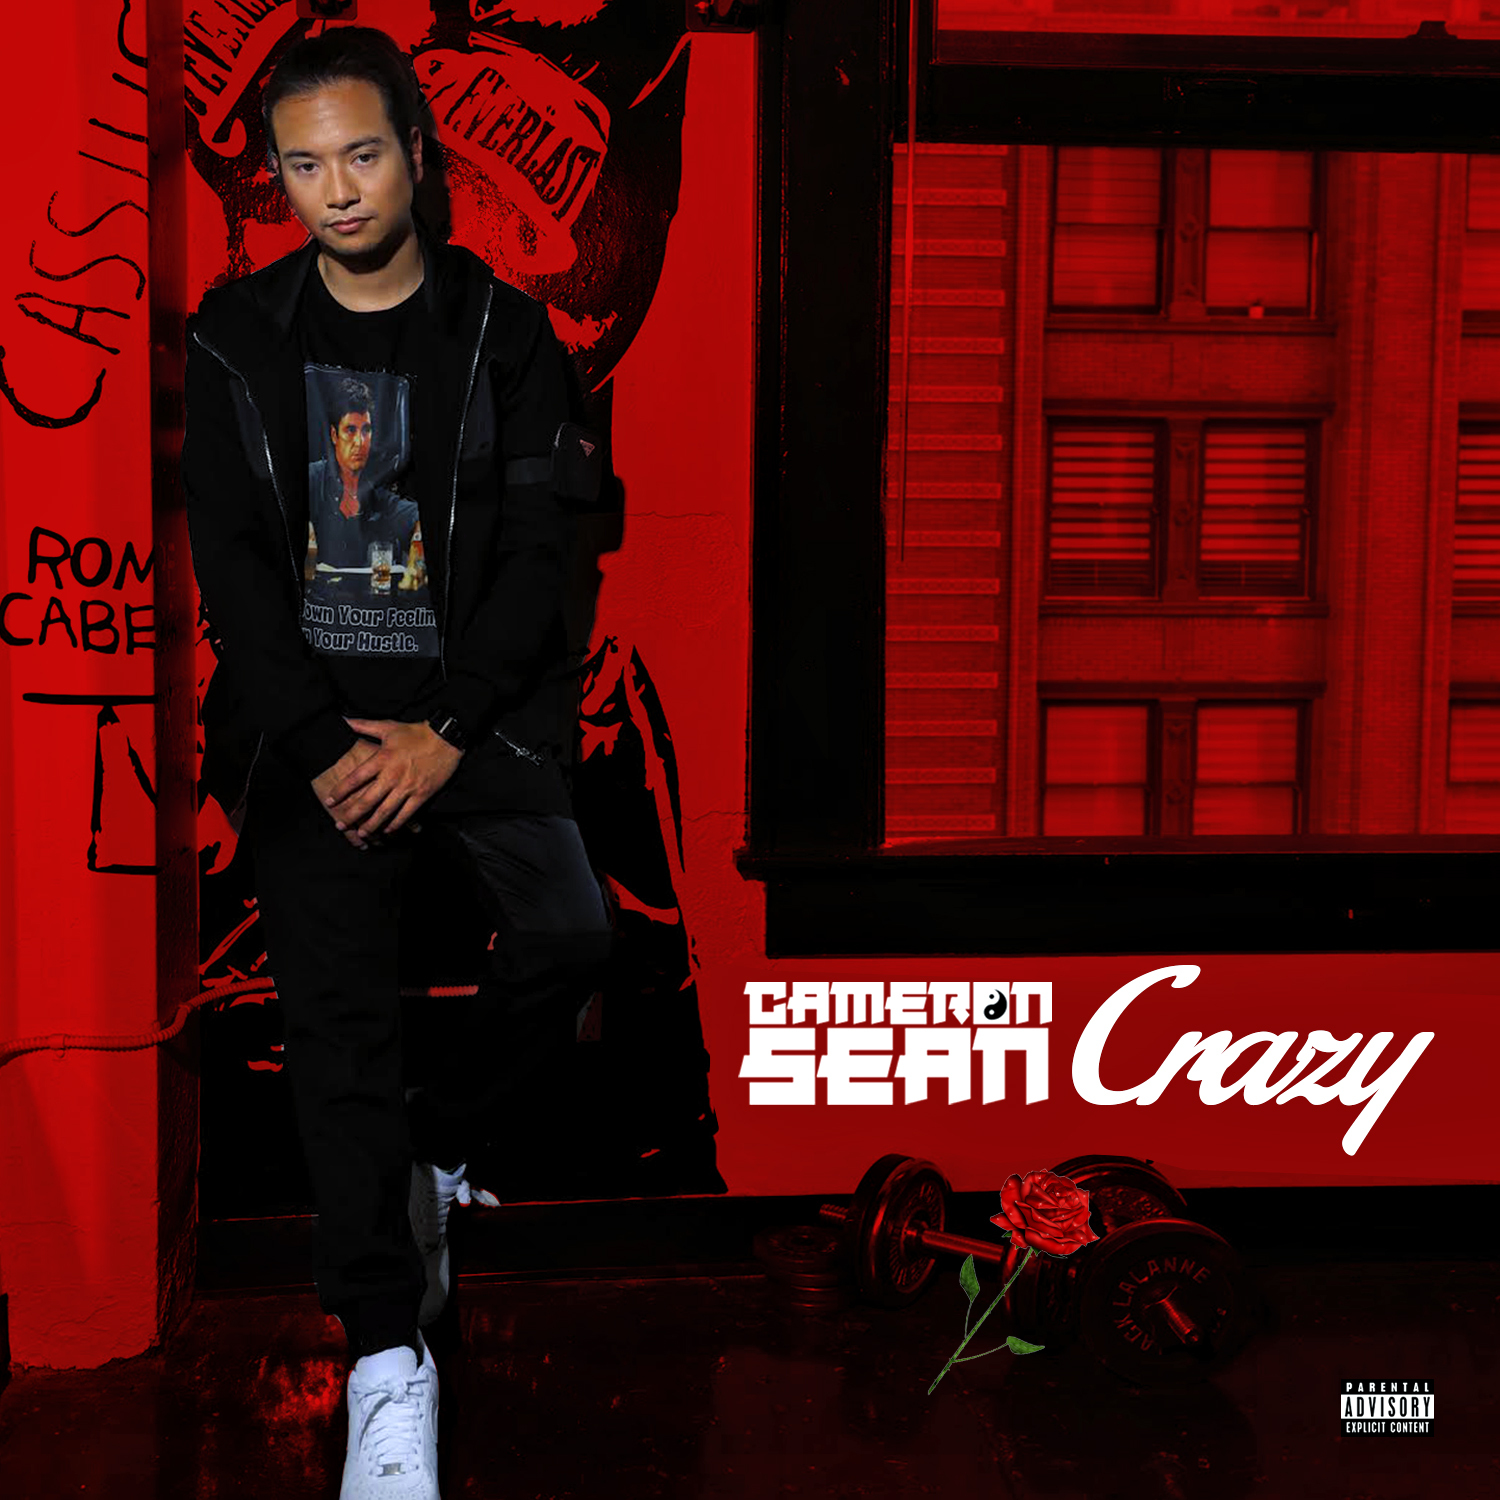 Striking at the heart of his fans, ‘Crazy’ is the new single out now from ‘Cameron Sean’.